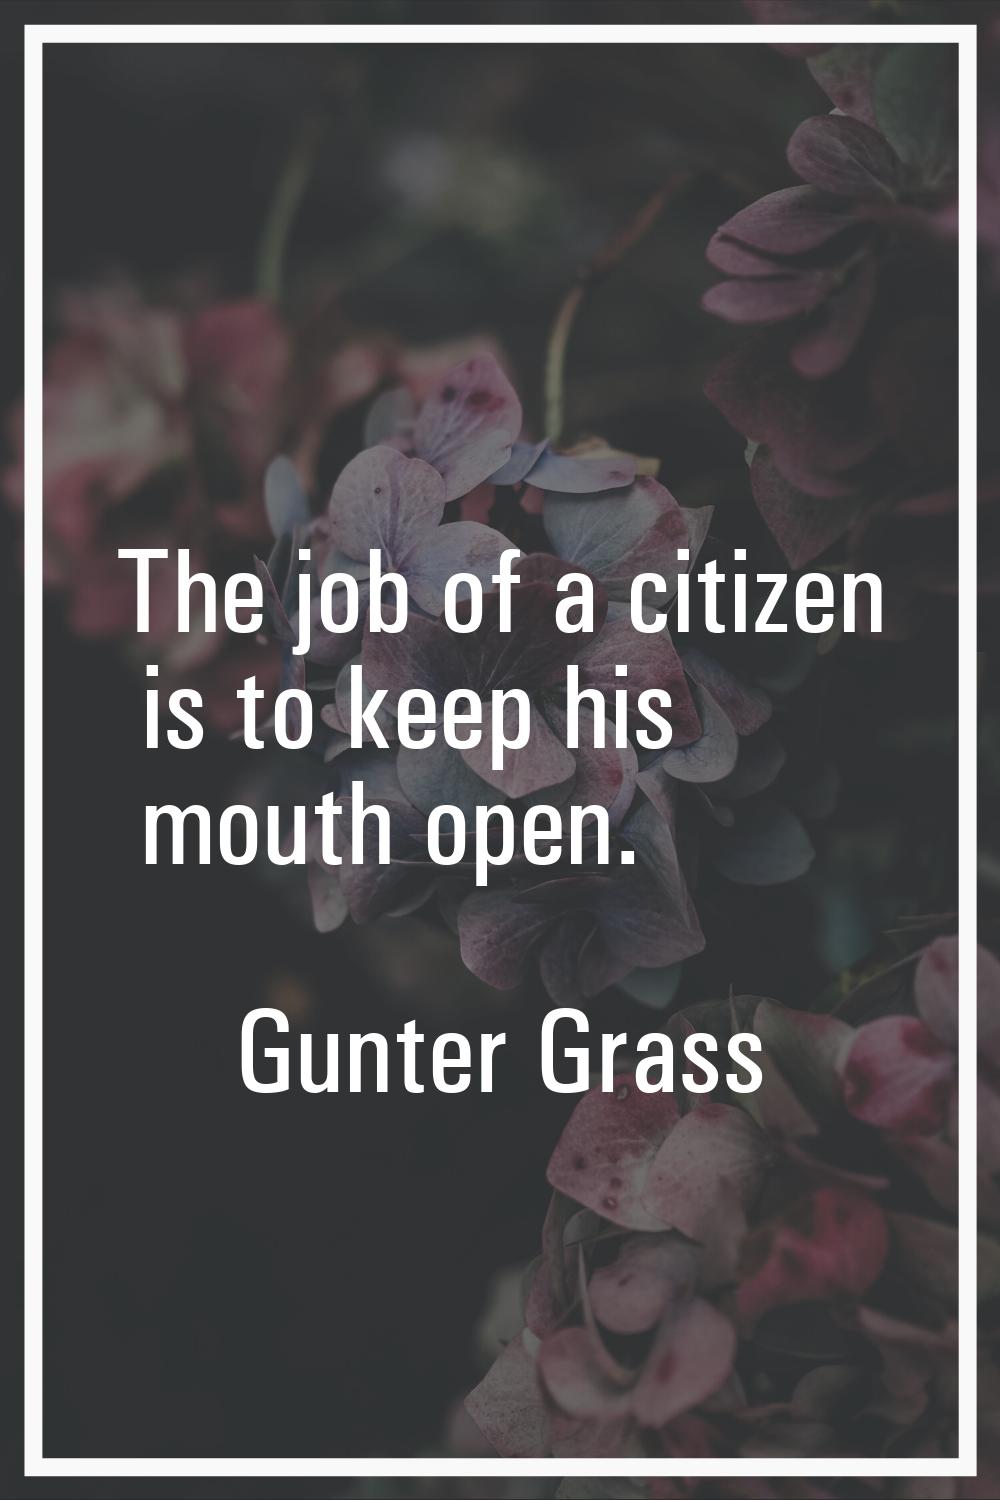 The job of a citizen is to keep his mouth open.